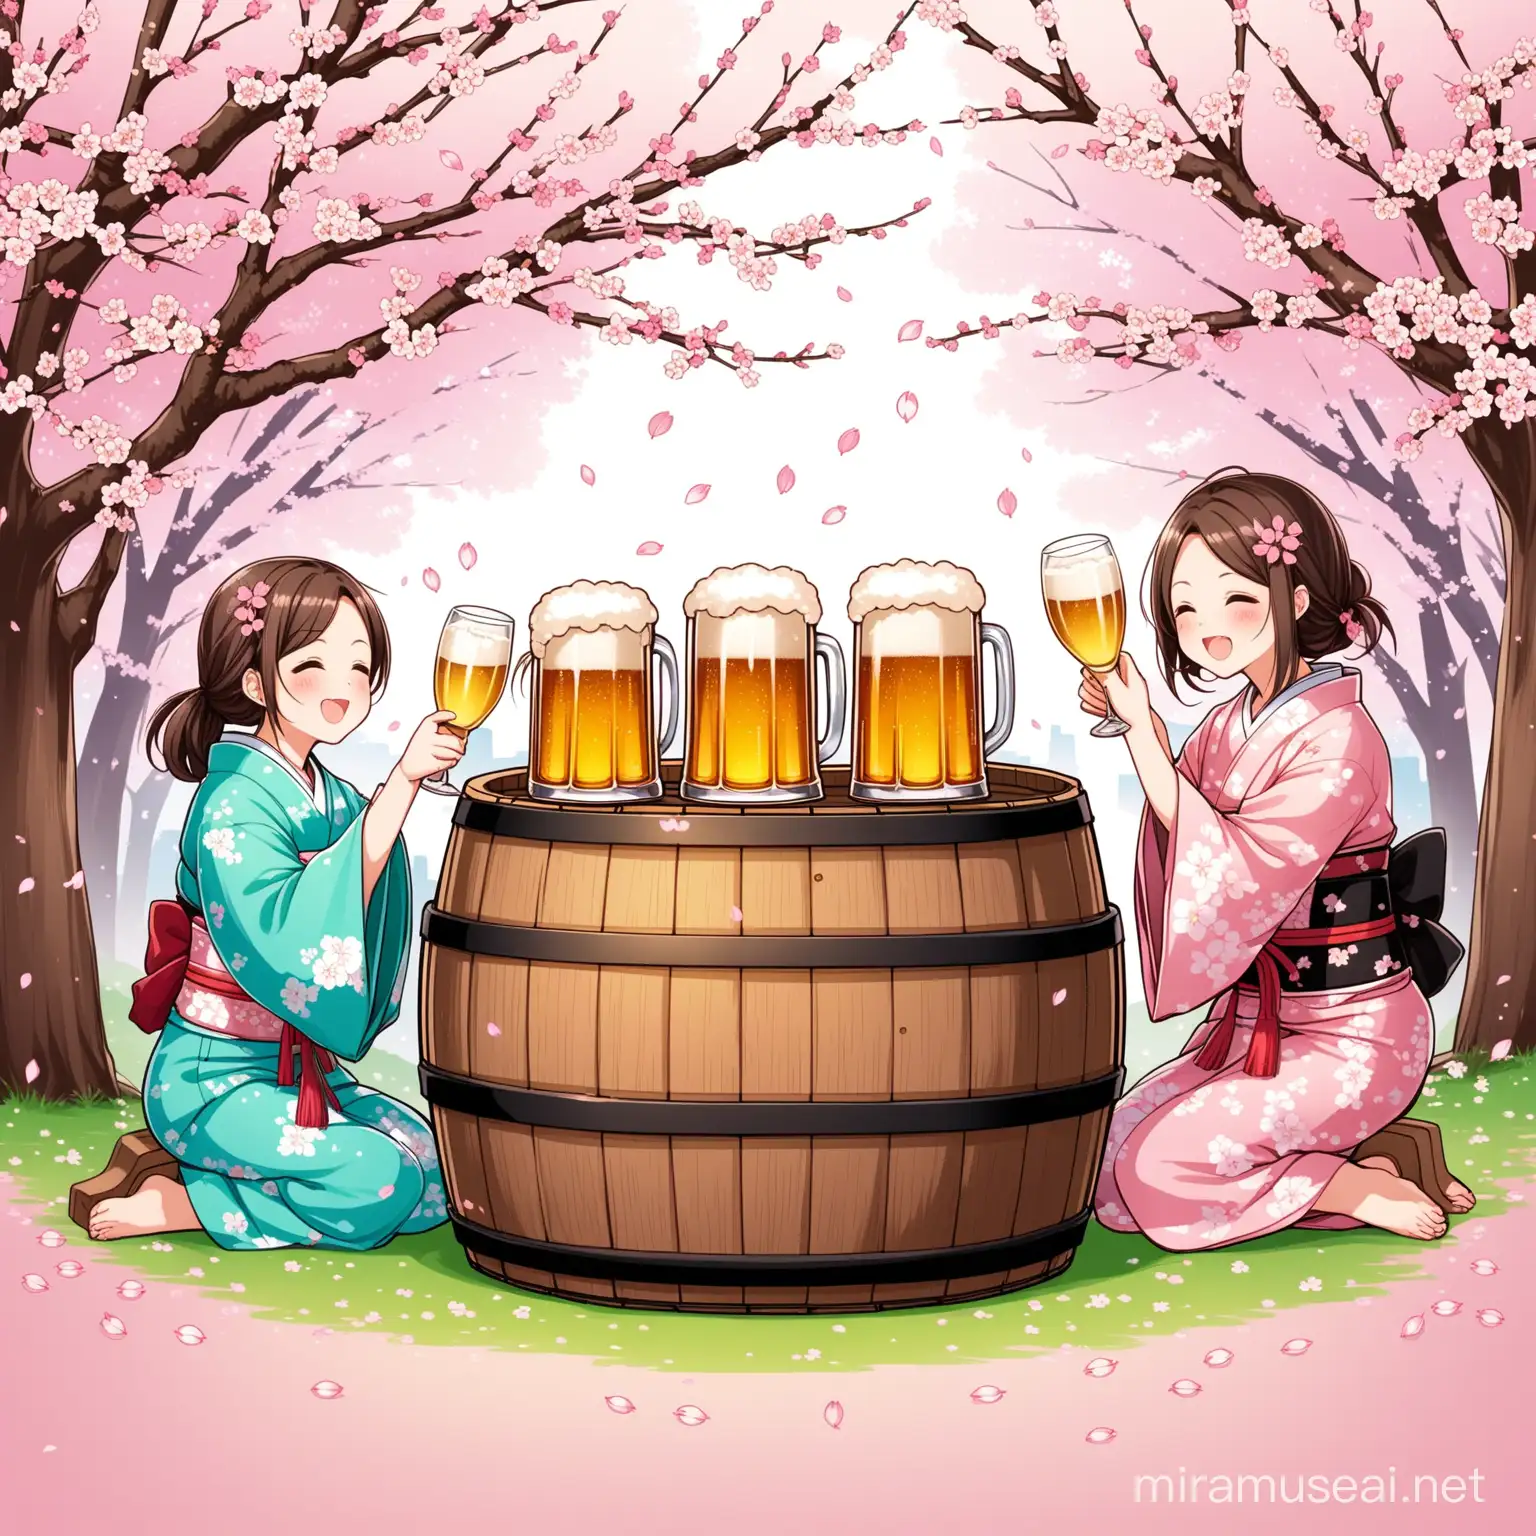 Japanese Hanami Celebration with Beer Barrel and Toasting Friends